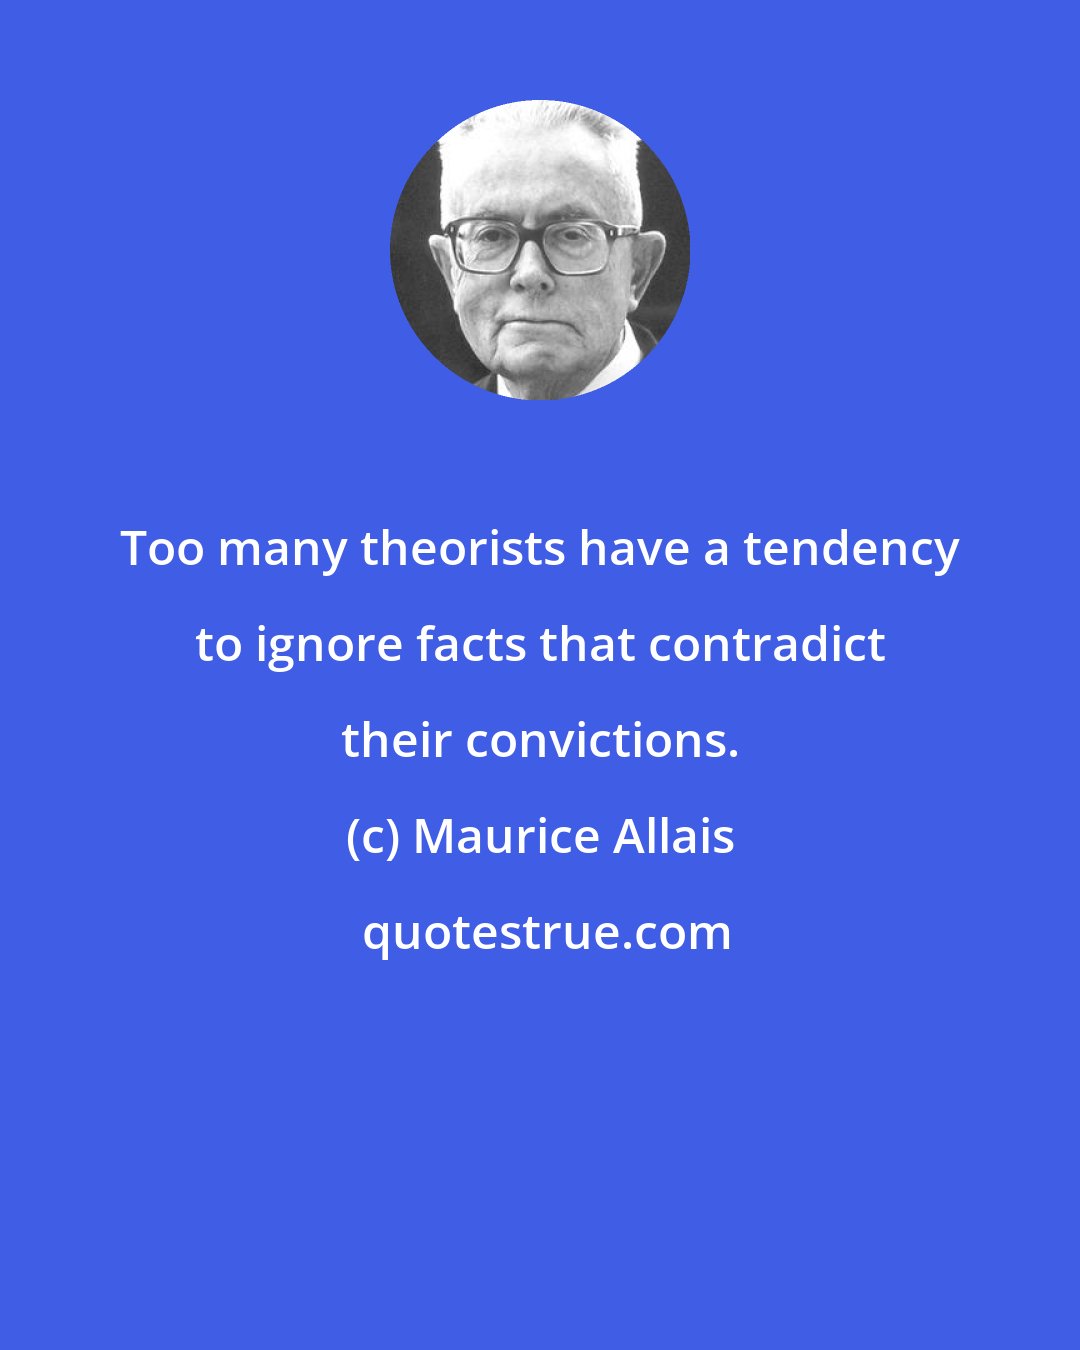 Maurice Allais: Too many theorists have a tendency to ignore facts that contradict their convictions.